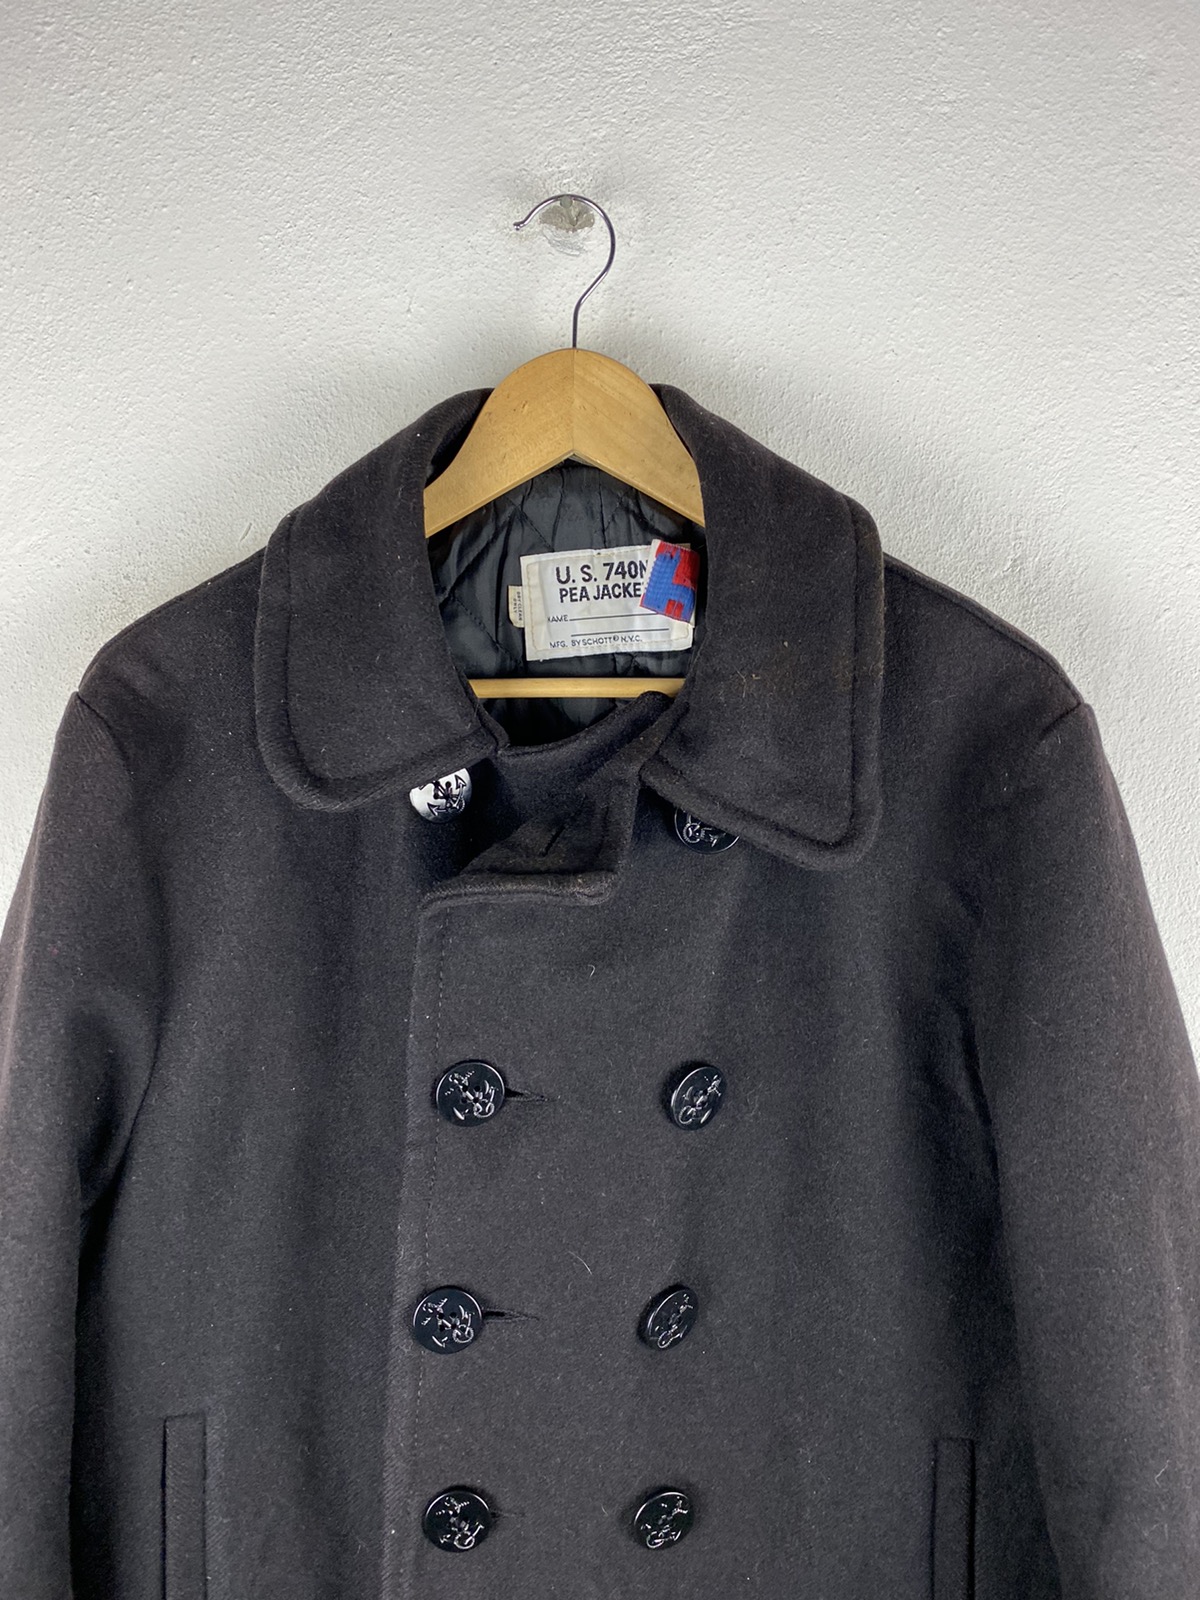 🔥SALE🔥aU.S 740N PEA JACKET BY SCHOTT MADE IN USA - 6